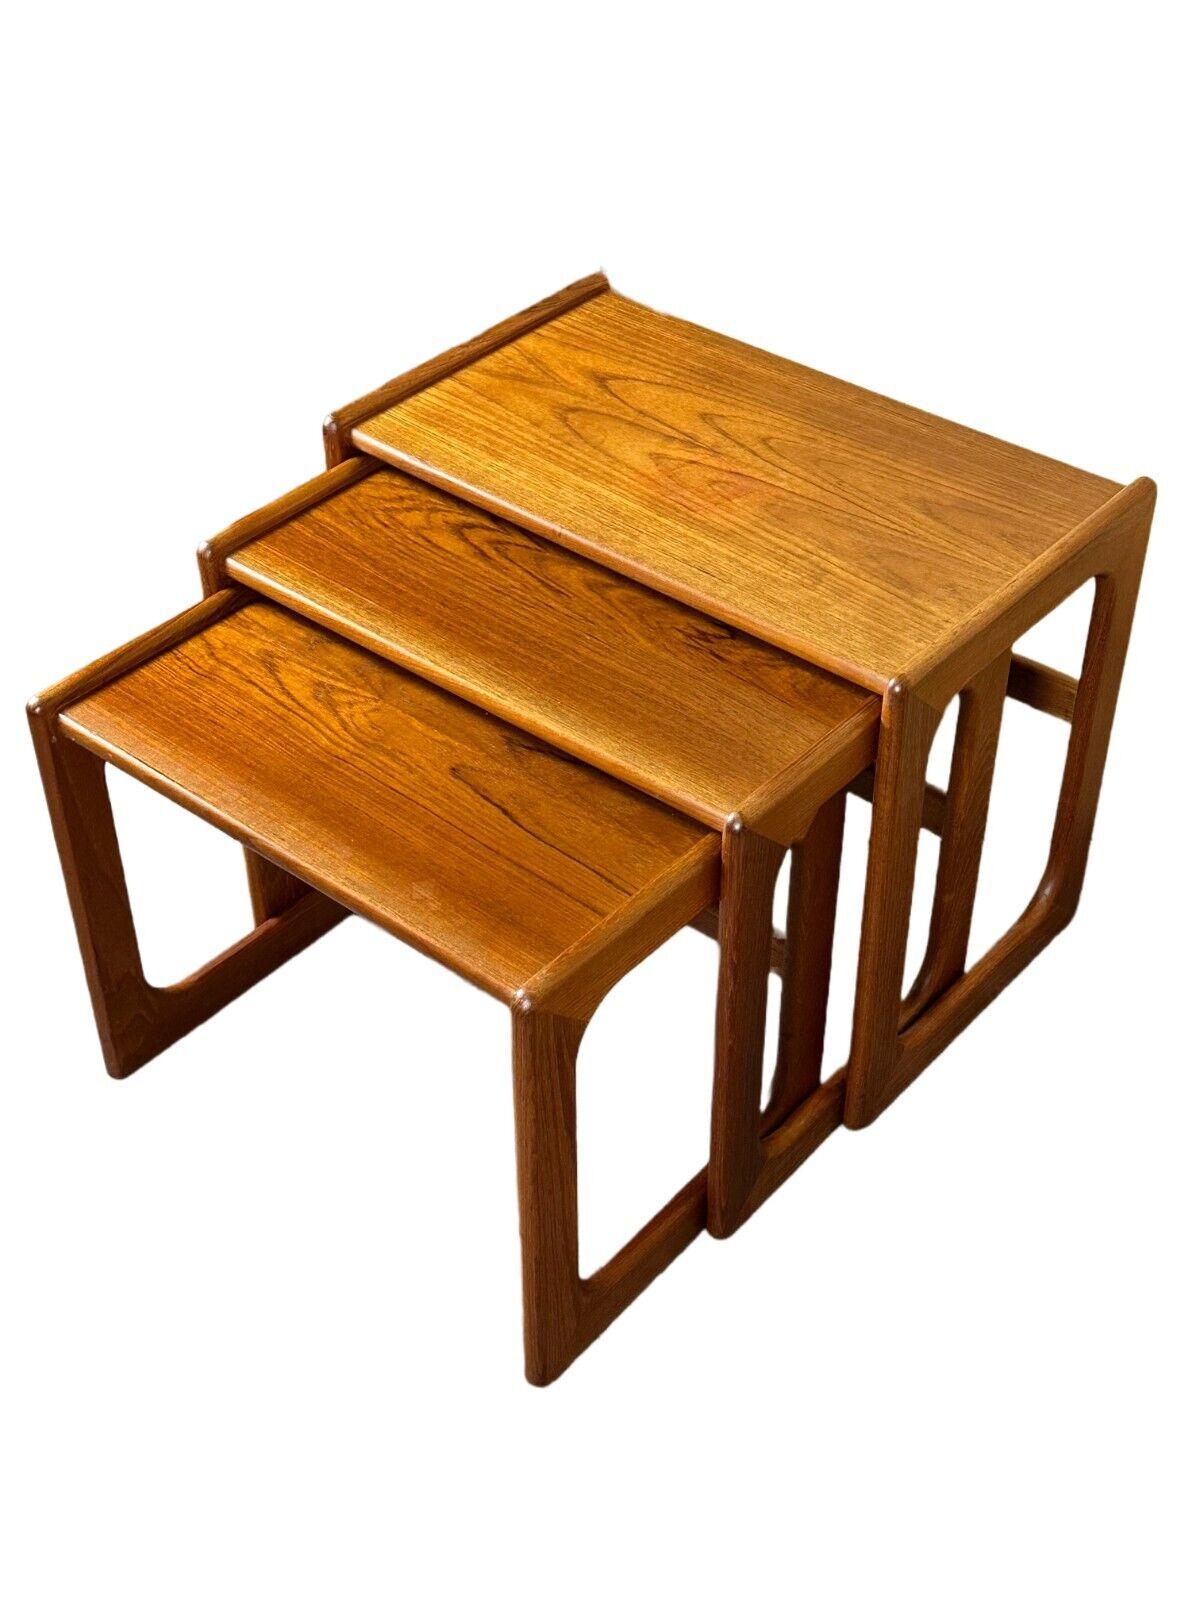 60s 70s Teak Nesting Tables side tables by Salin Nybor Denmark Design

Object: side tables

Manufacturer: Salin Nybor

Condition: good - vintage

Age: around 1960-1970

Dimensions:

Width = 61cm
Depth = 37.5cm
Height = 49cm
(largest